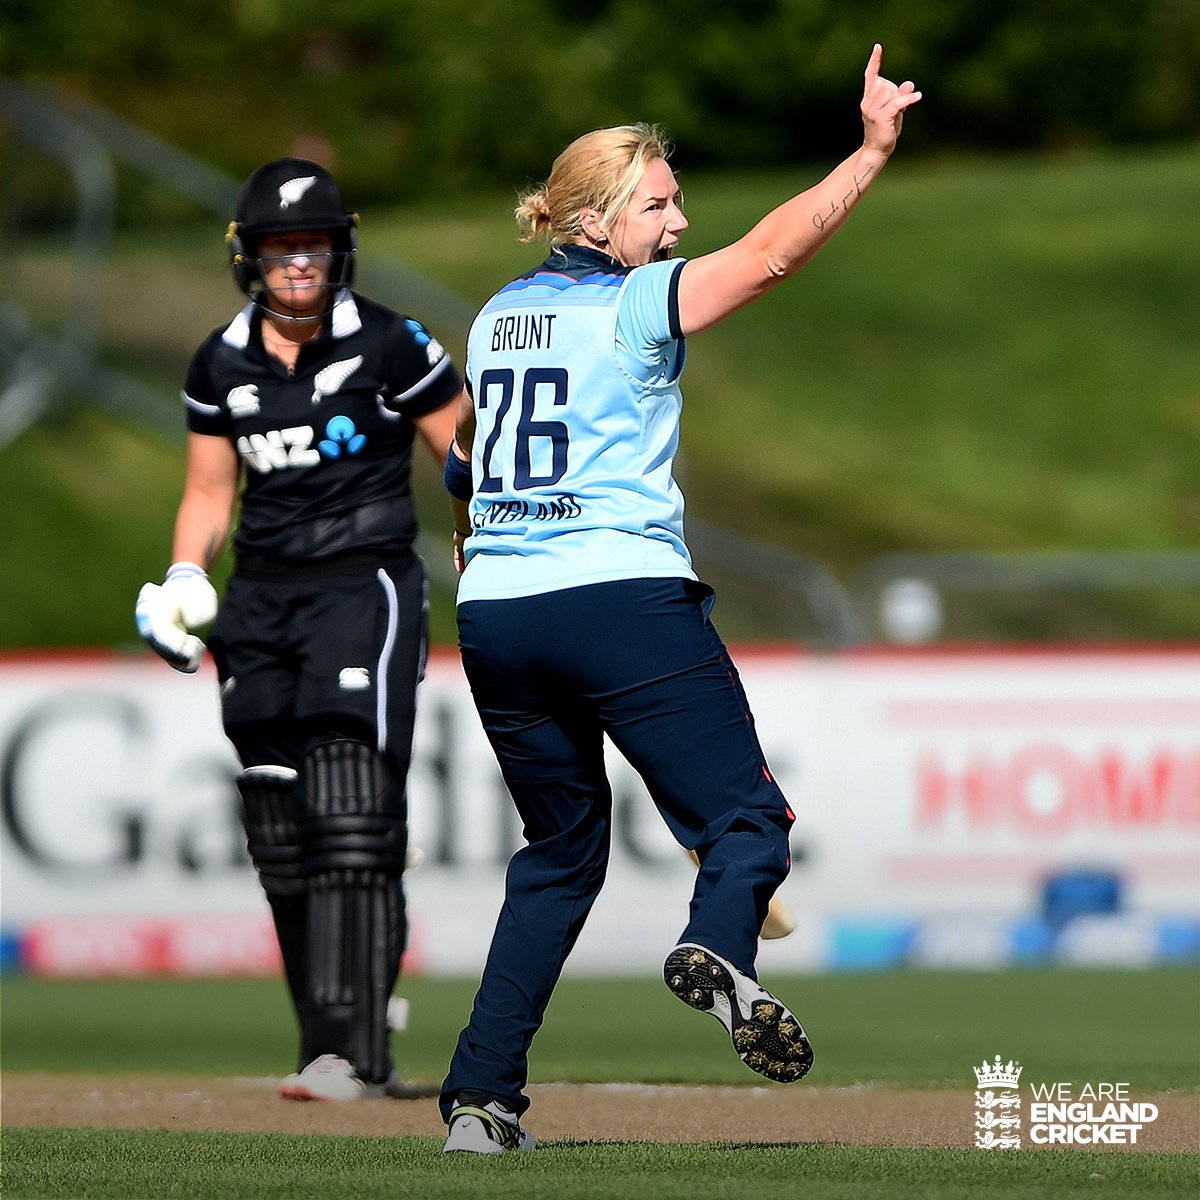 1⃣5⃣3⃣ ODI wickets and counting 🐐 @KBrunt26 is phenomenal 👏 #NZvENG